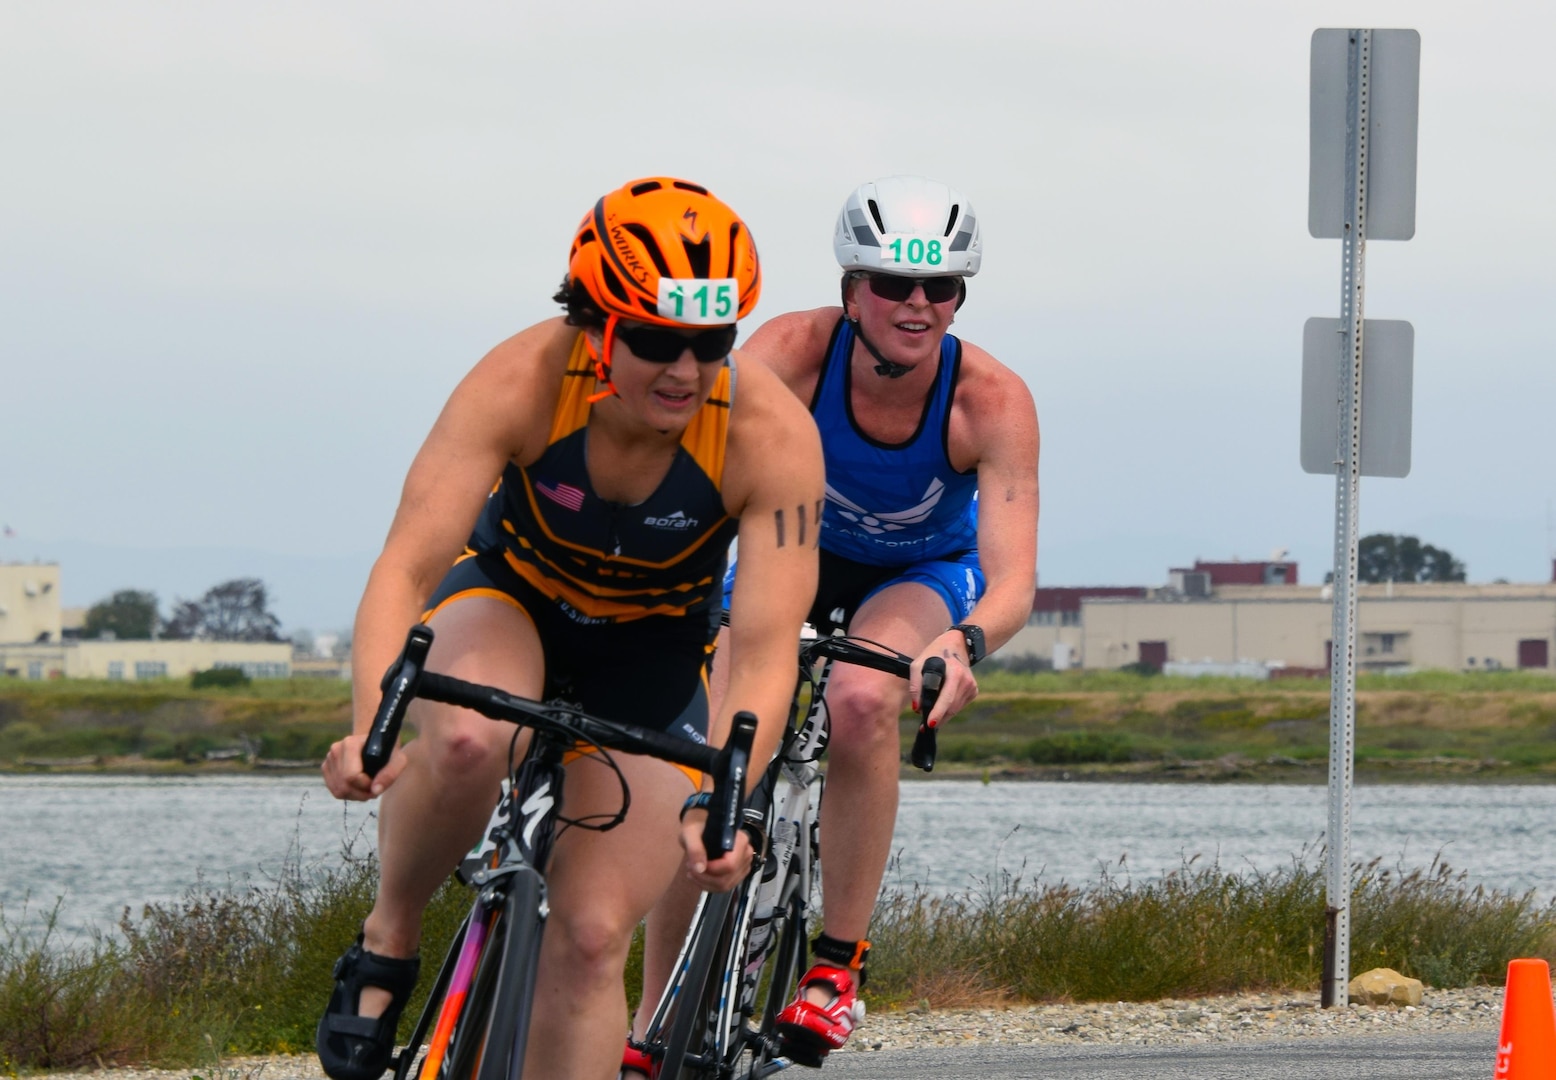 Point Mugu, Calif. (June 10, 2017) Army 1st Lt. Justine Emge is just ahead of Air Force Maj. Judith Coyle as they finish the 10-kilometer bike portion of the Armed Forces Triathlon. (U.S. Navy photo by Theresa Miller/Released)